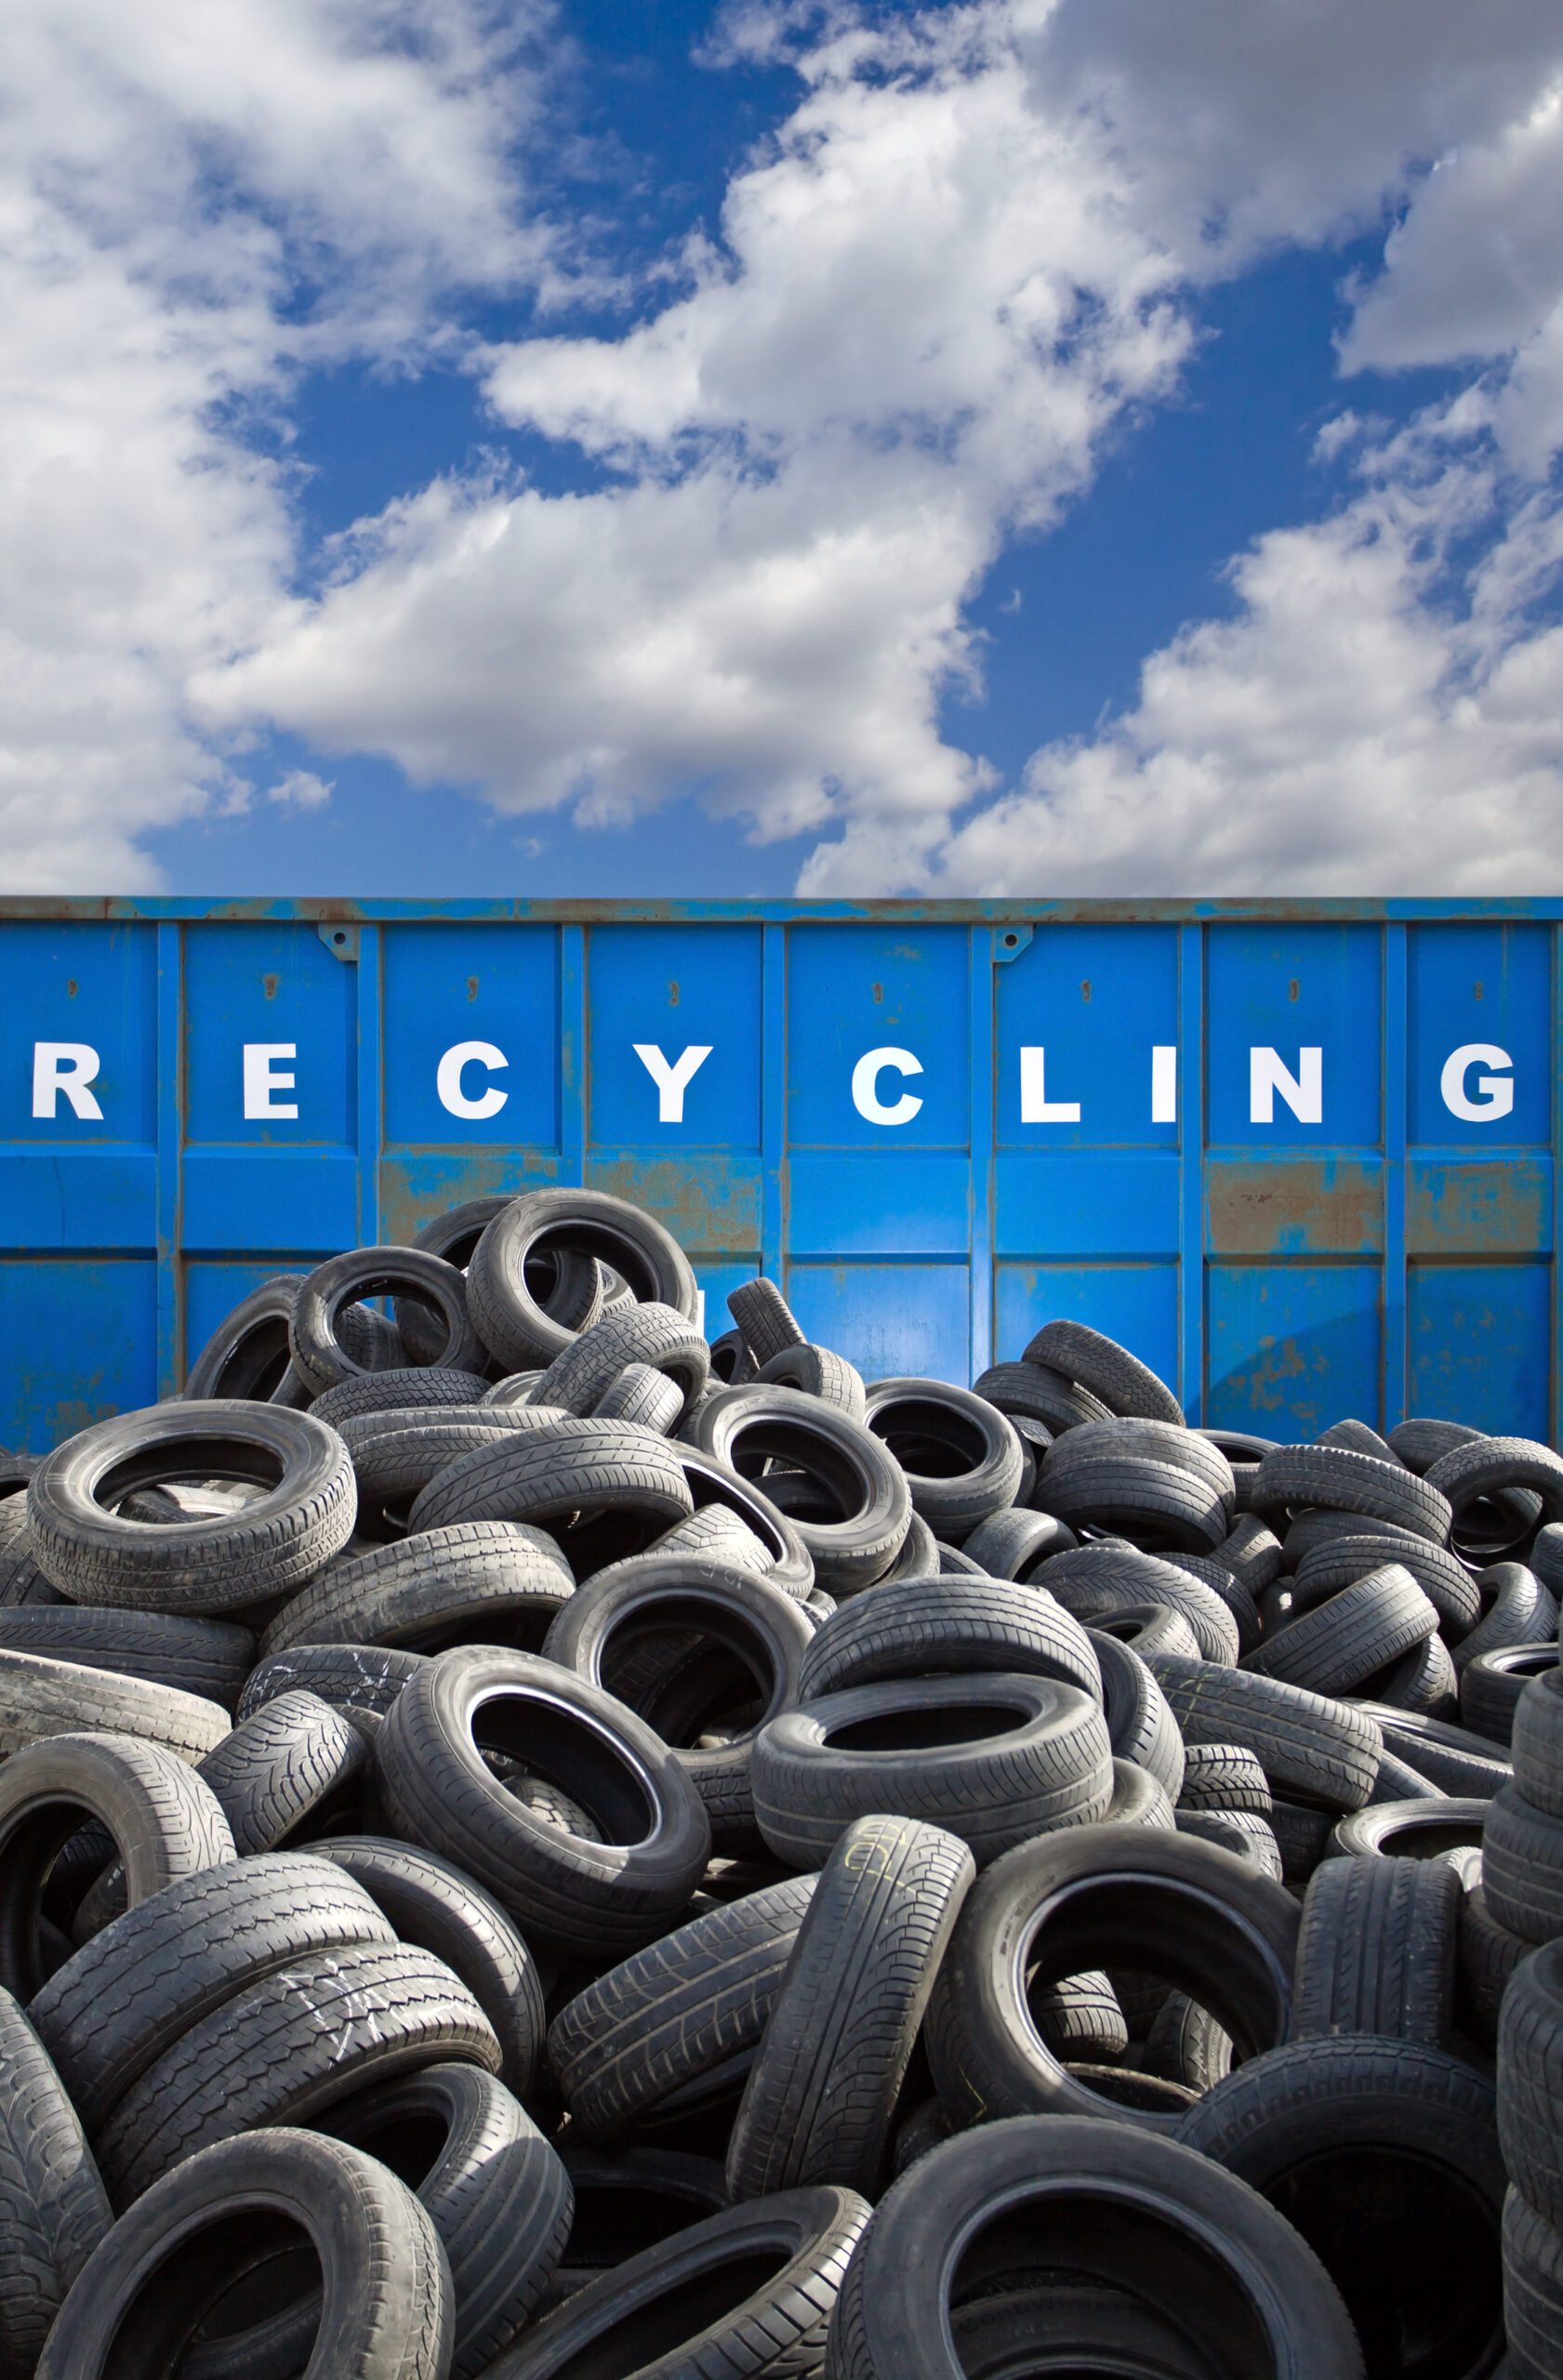 Recycling business container and tires